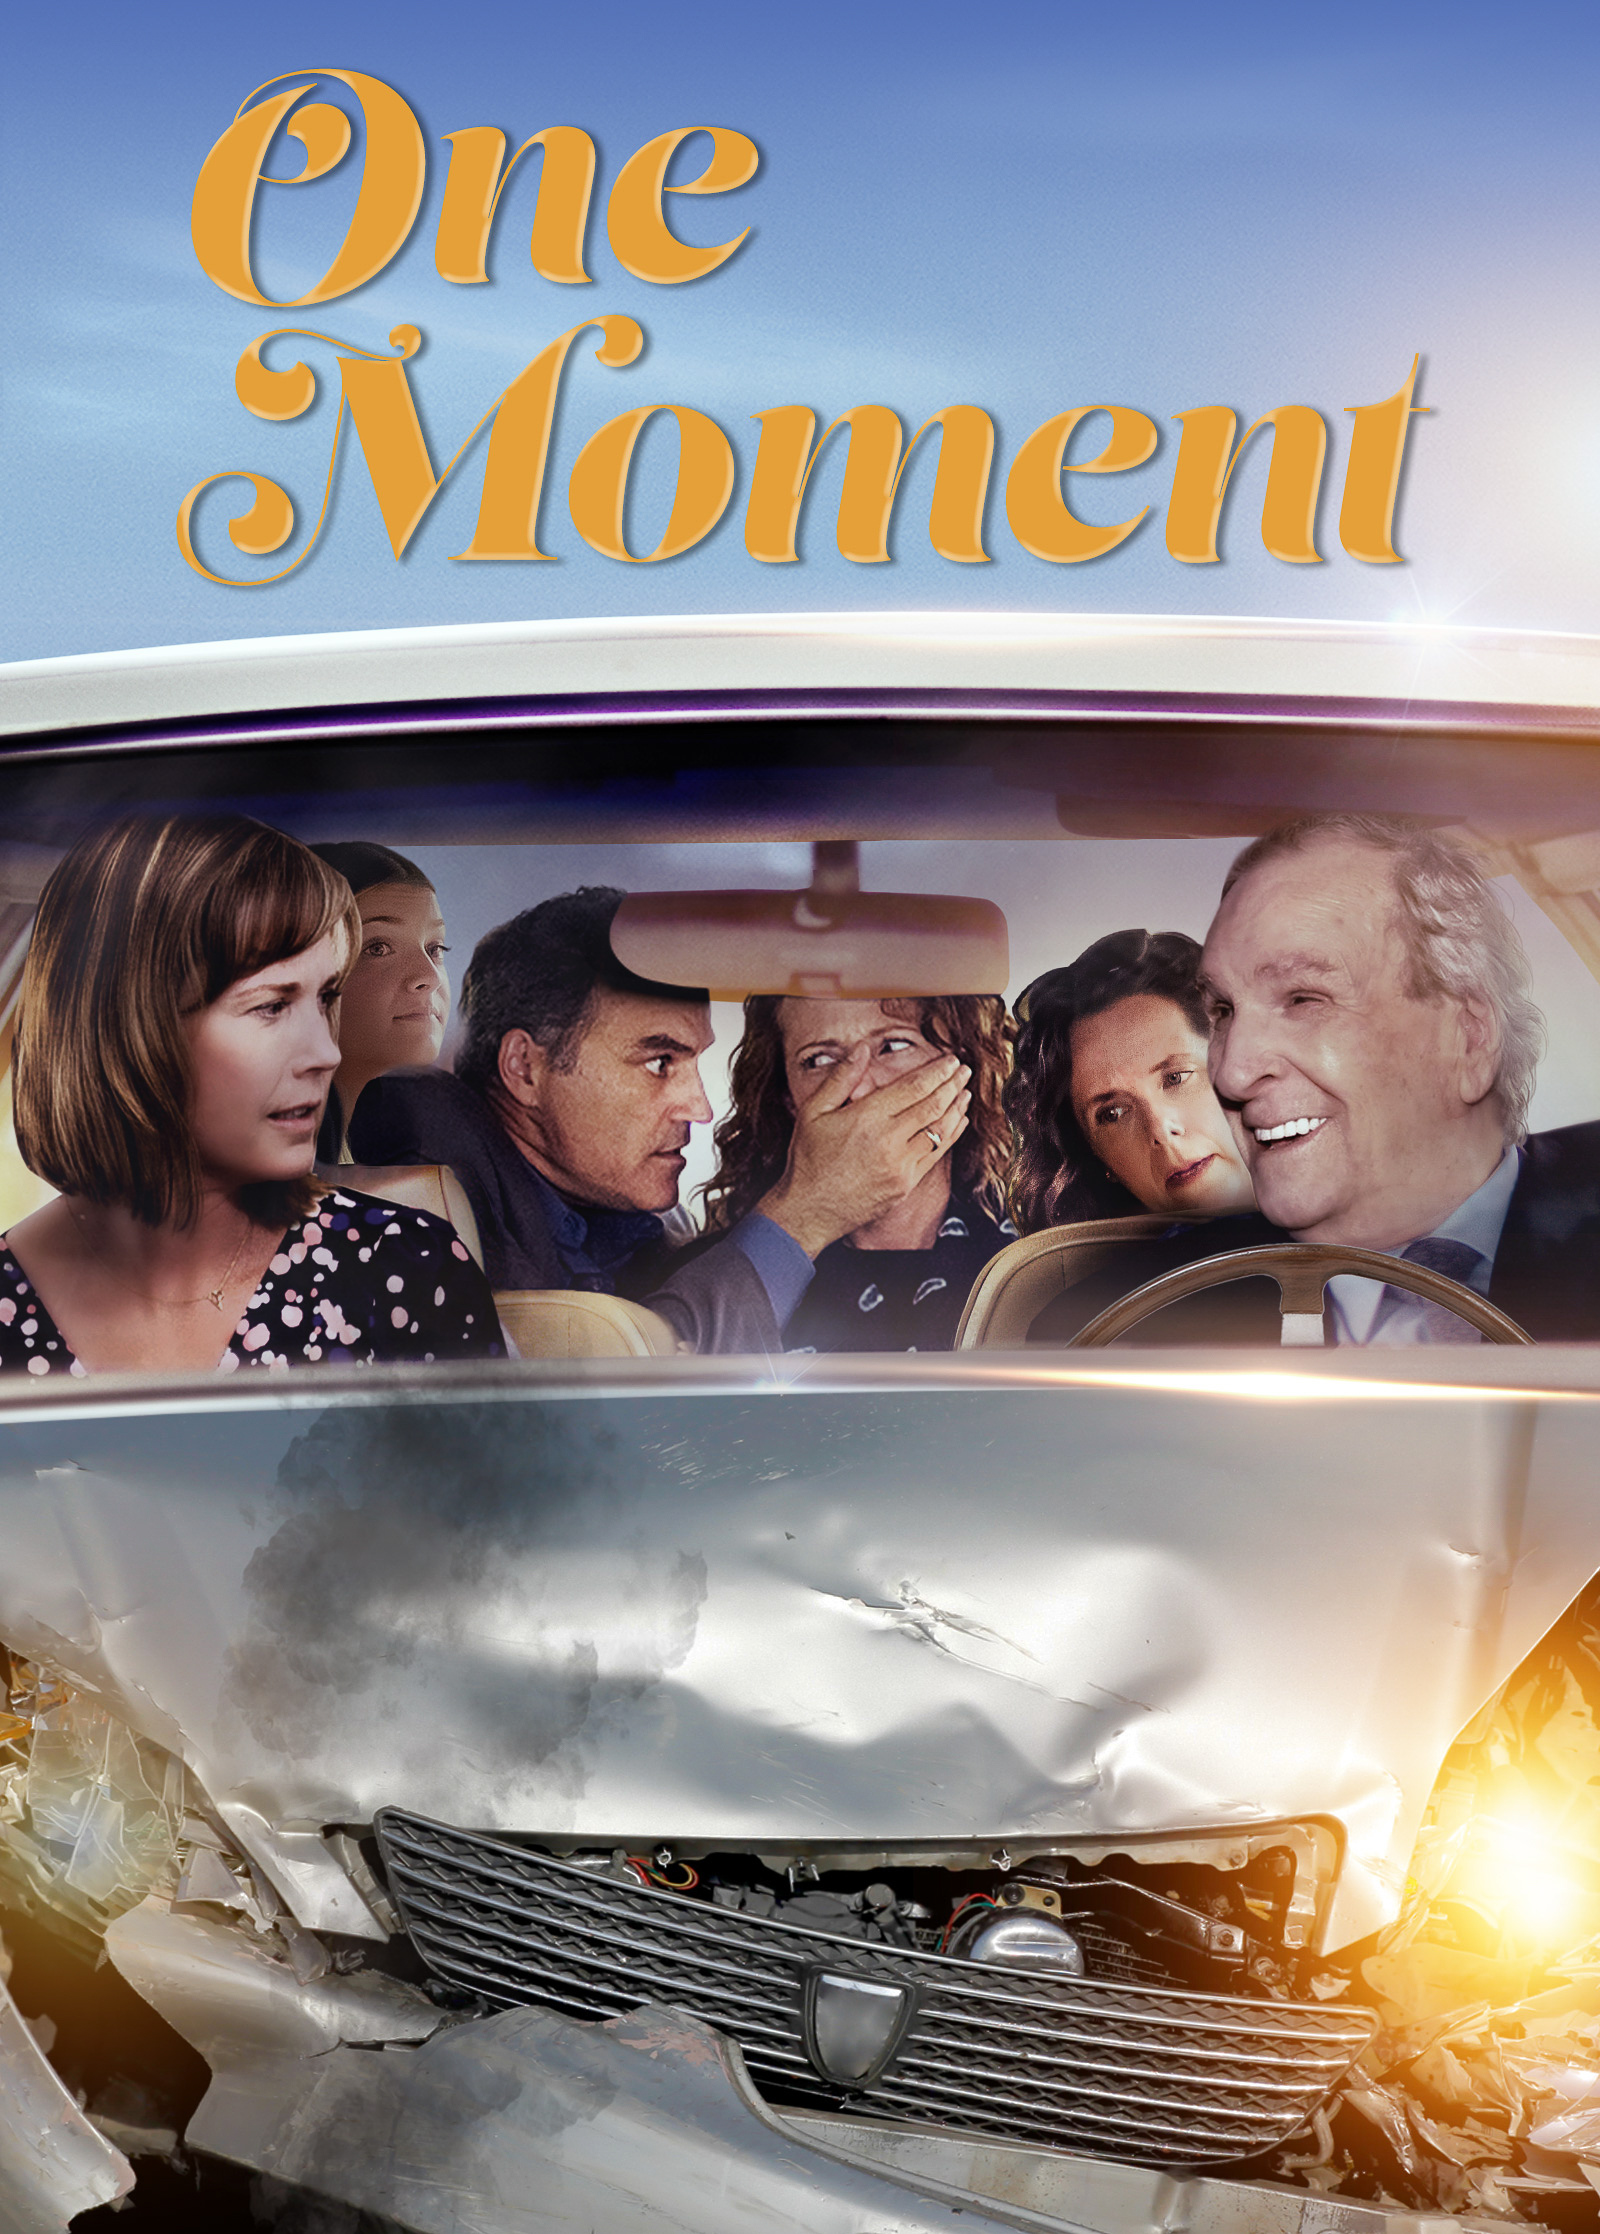 Cover Art for "One Moment"